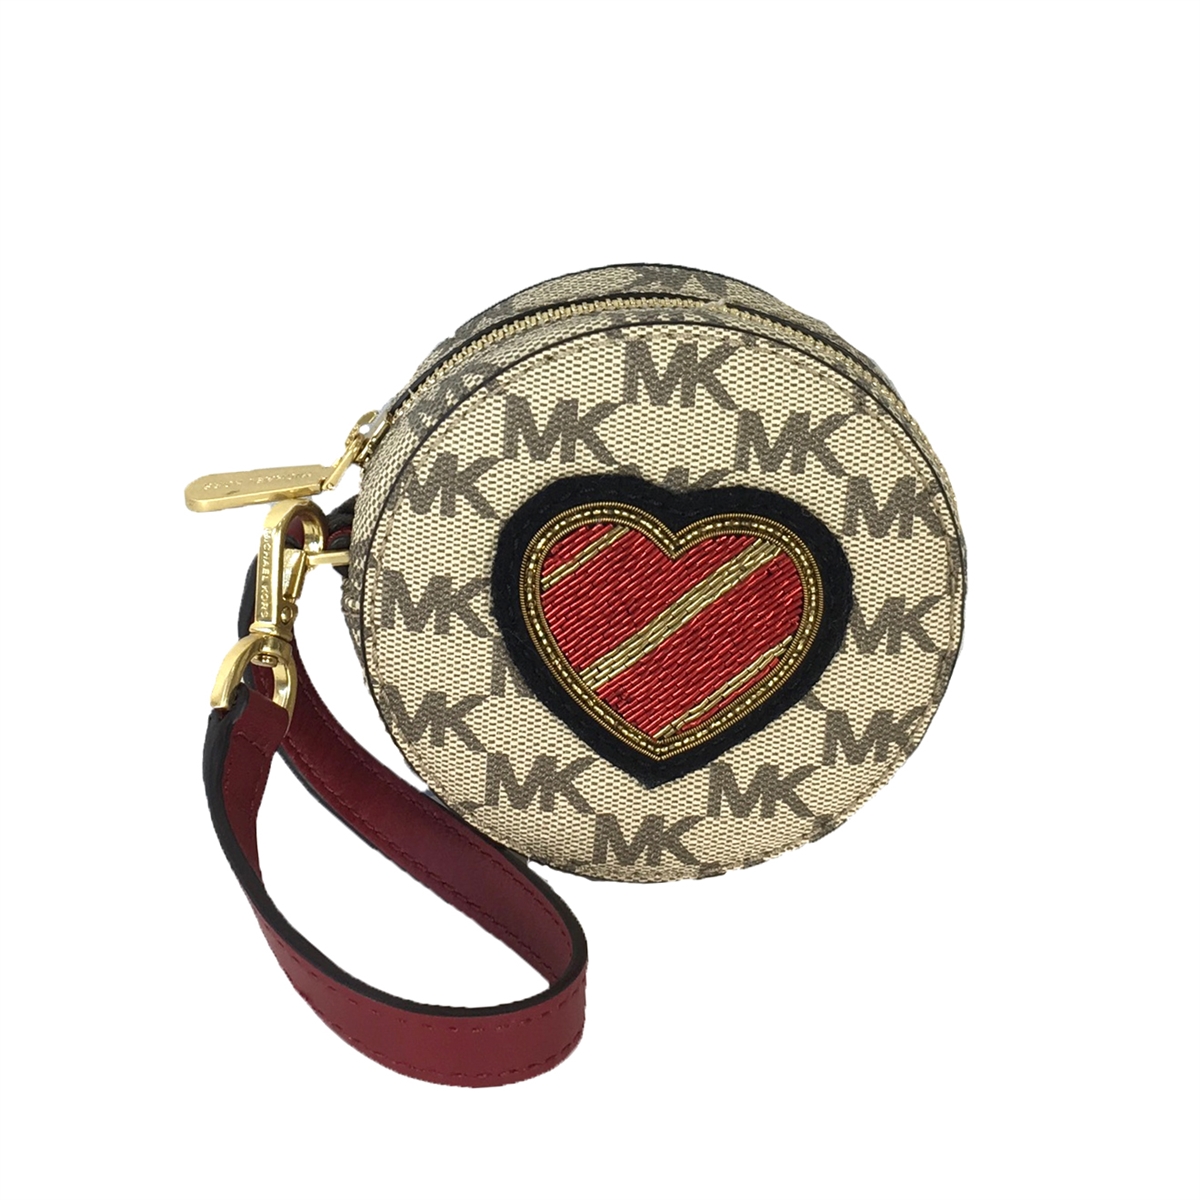 Personalized Heart Coin Purse - Nik's Naks